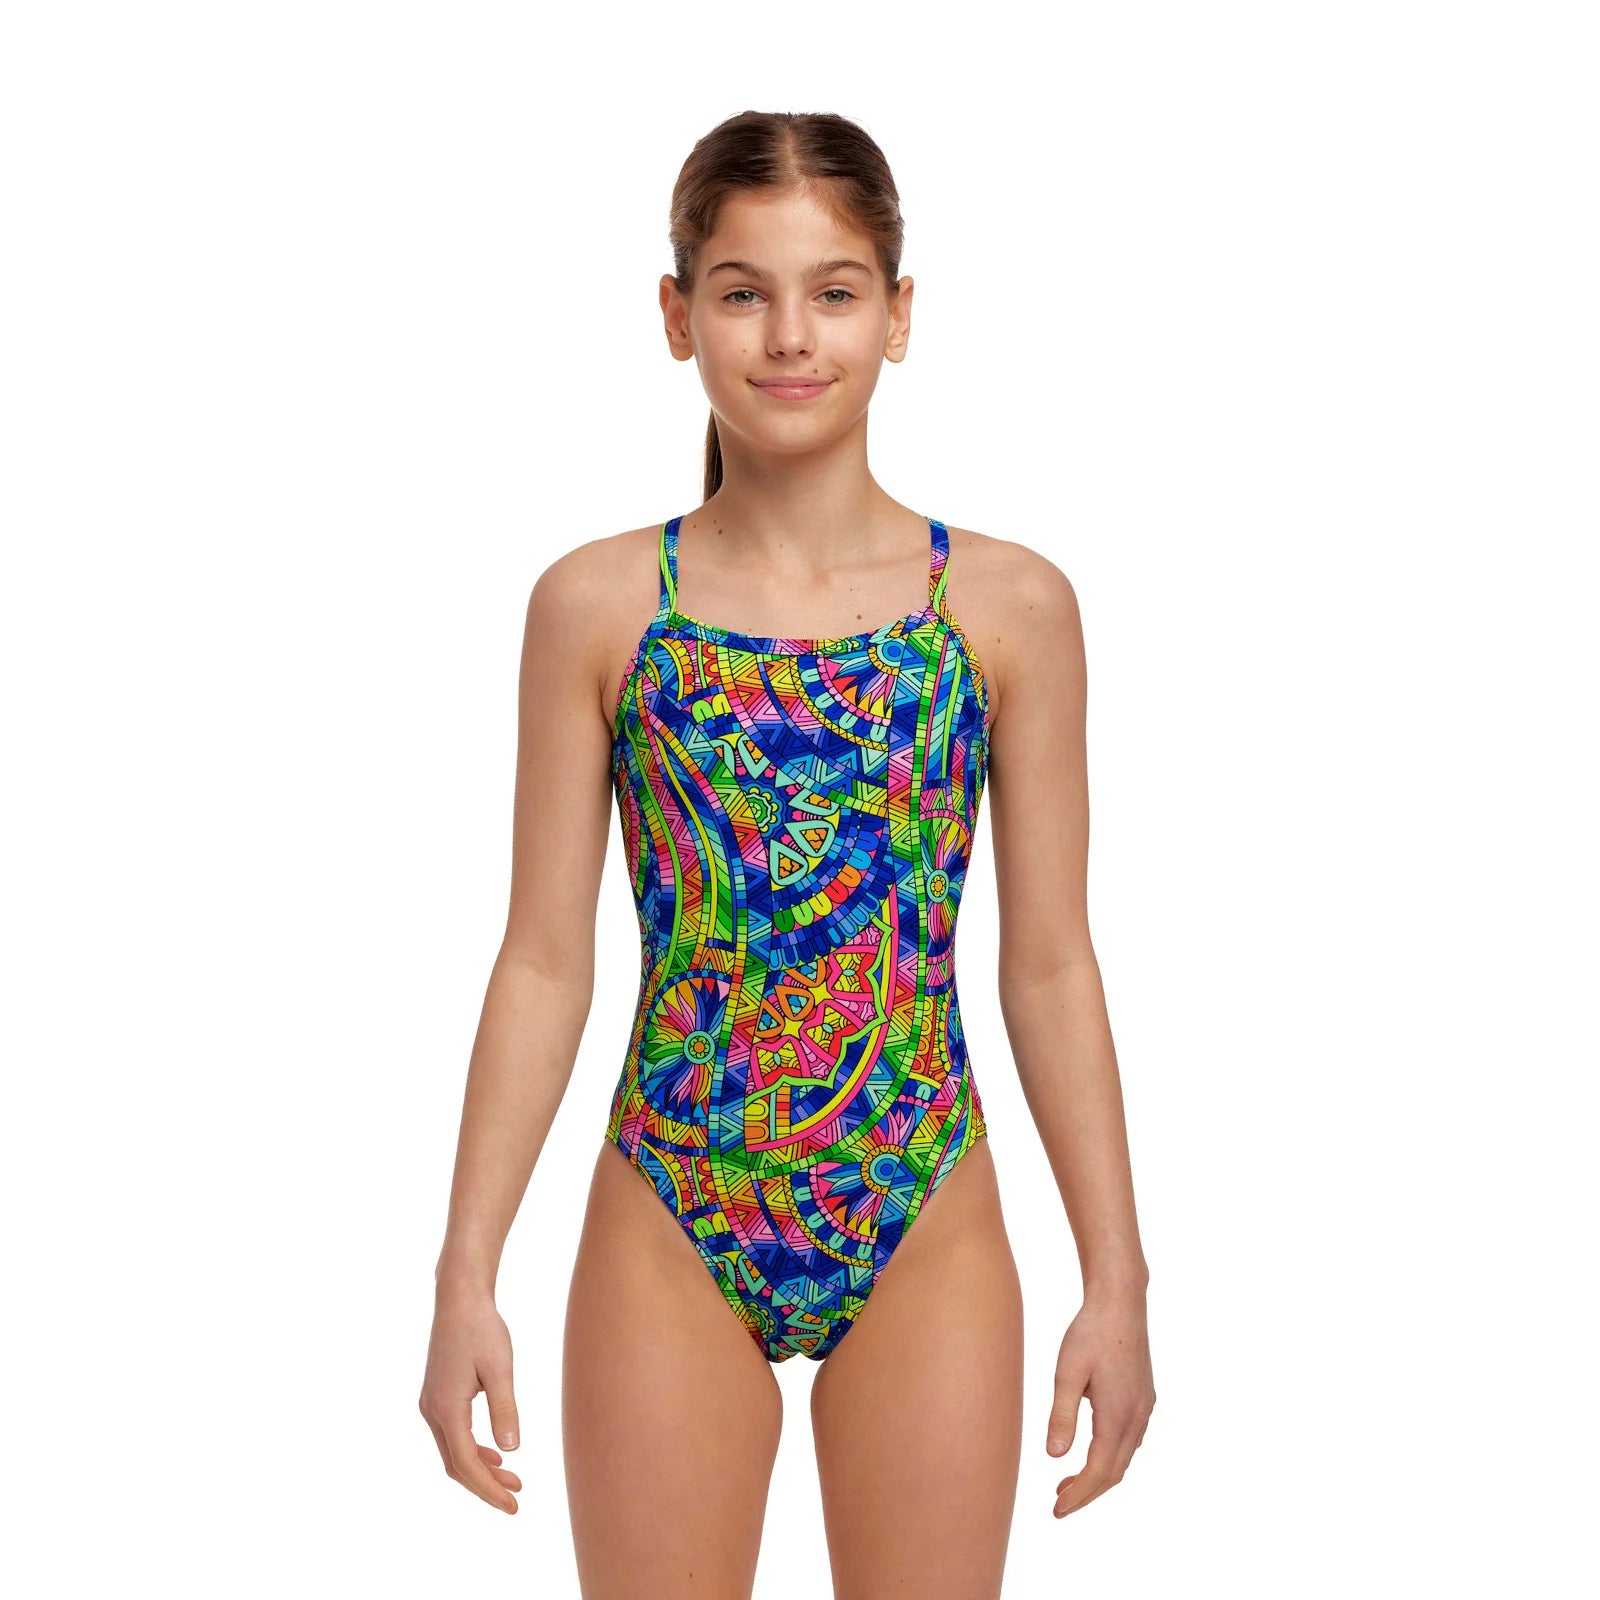 Way Funky Funkita Printed One Piece Spin The Bottle, Badeanzug, Kinder